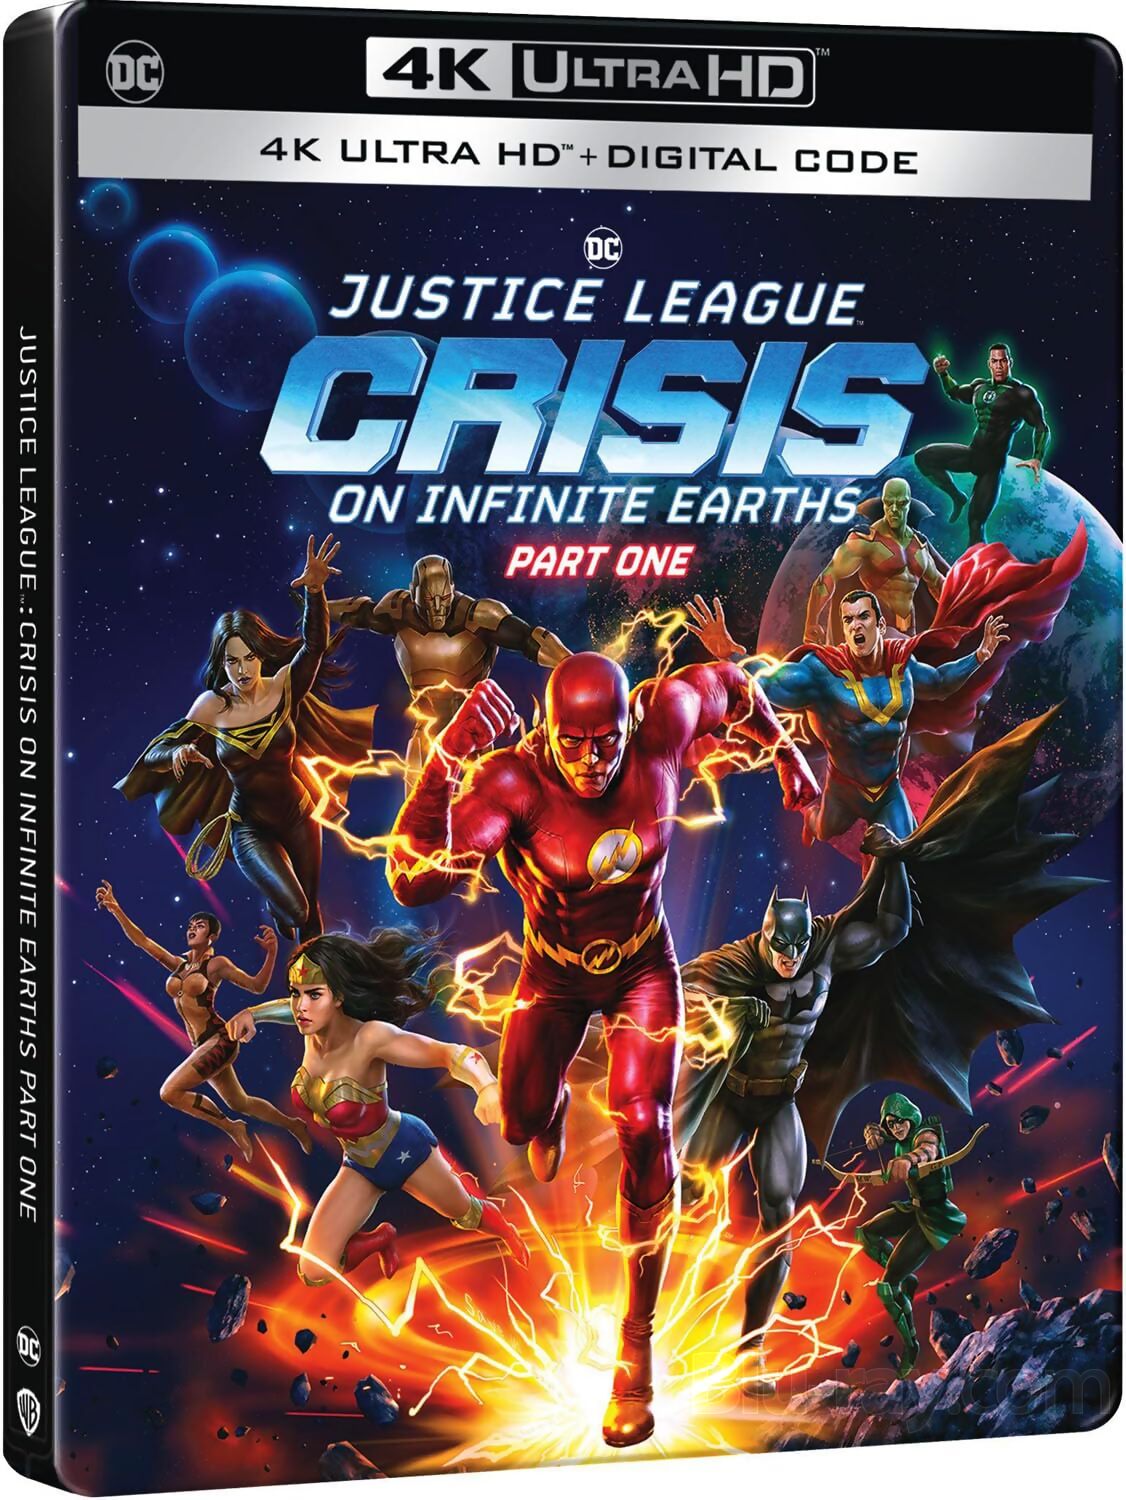 Release details revealed for JUSTICE LEAGUE: CRISIS ON INFINITE